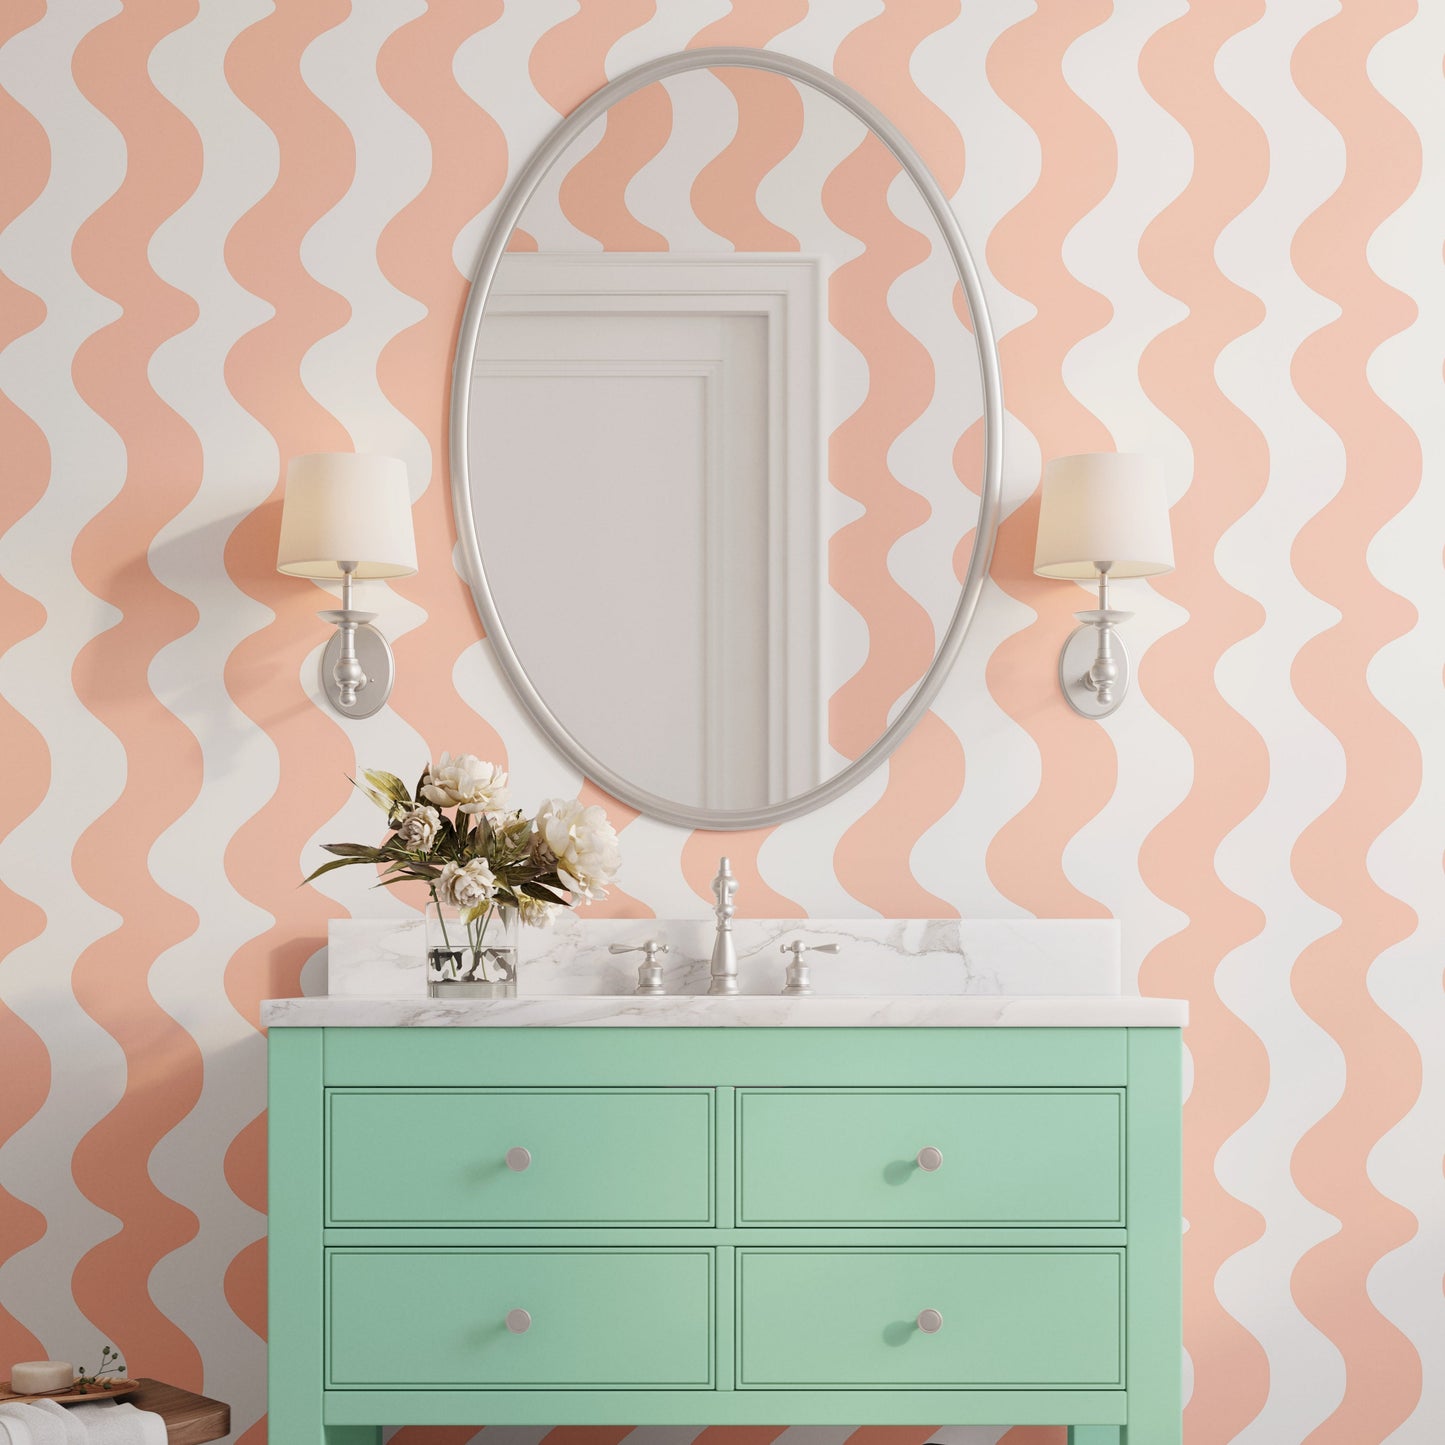 peach wallpaper pastel bathroom with wavy pattern abstract design for interiors retro